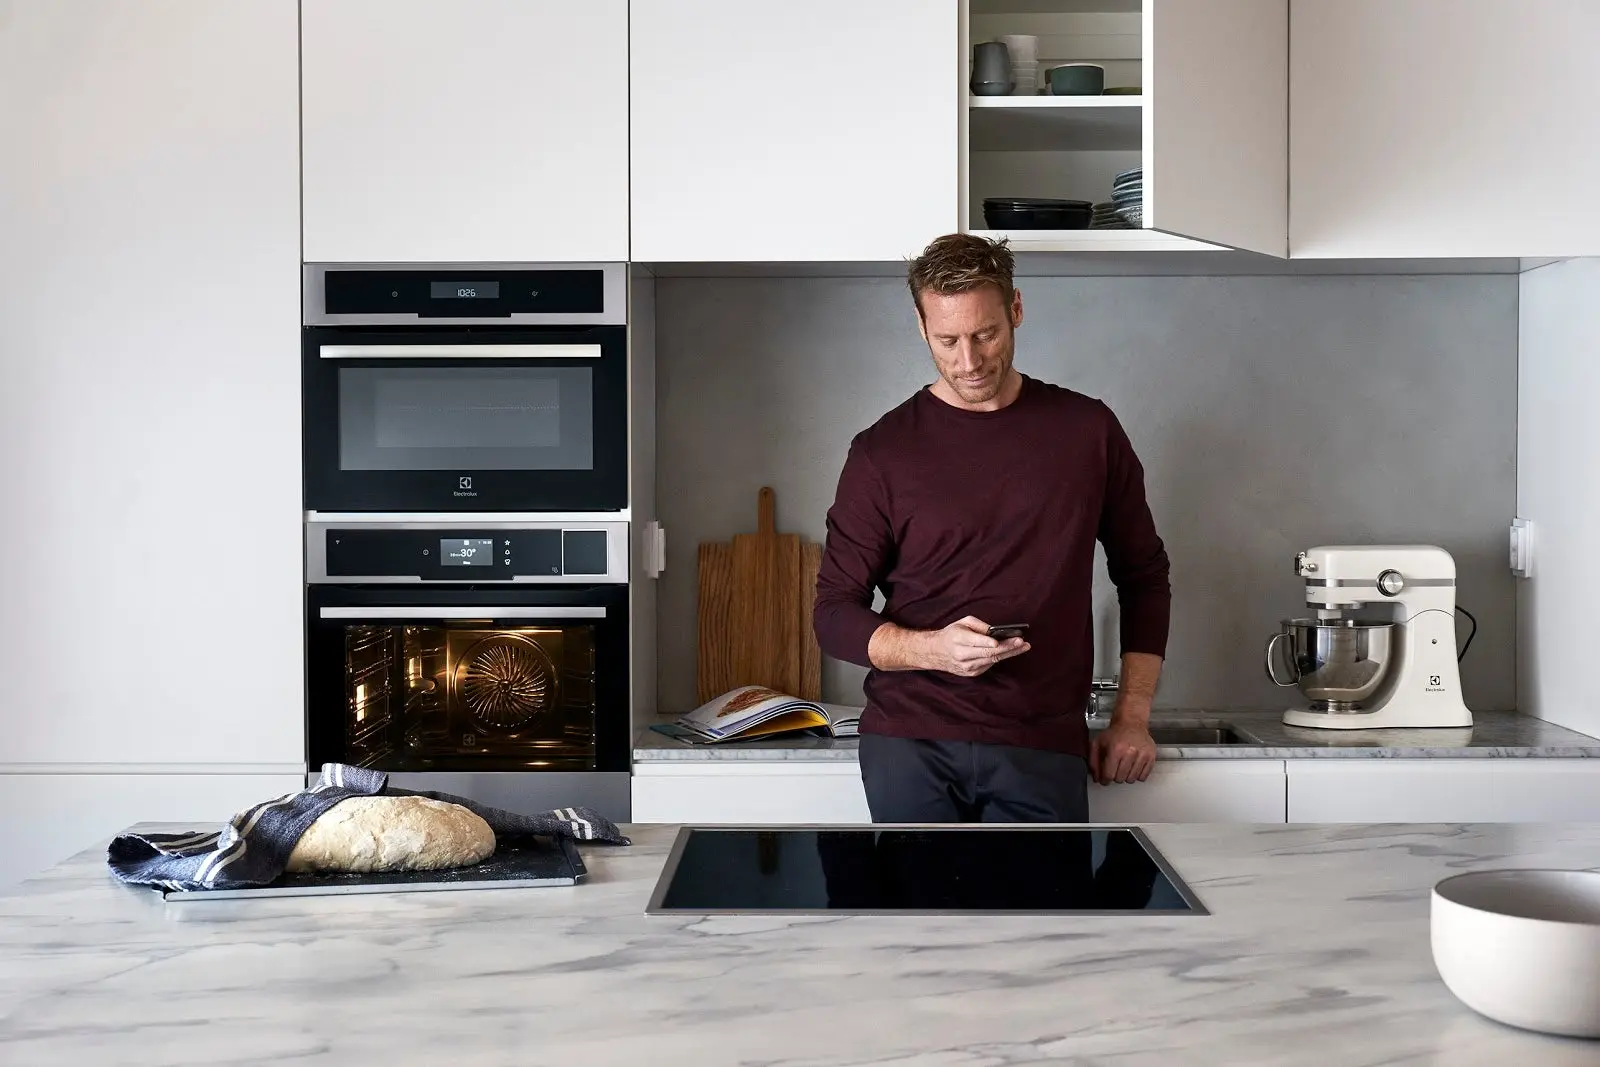 A male model browses their phone in a kitchen appliance photoshoot for Electrolux.